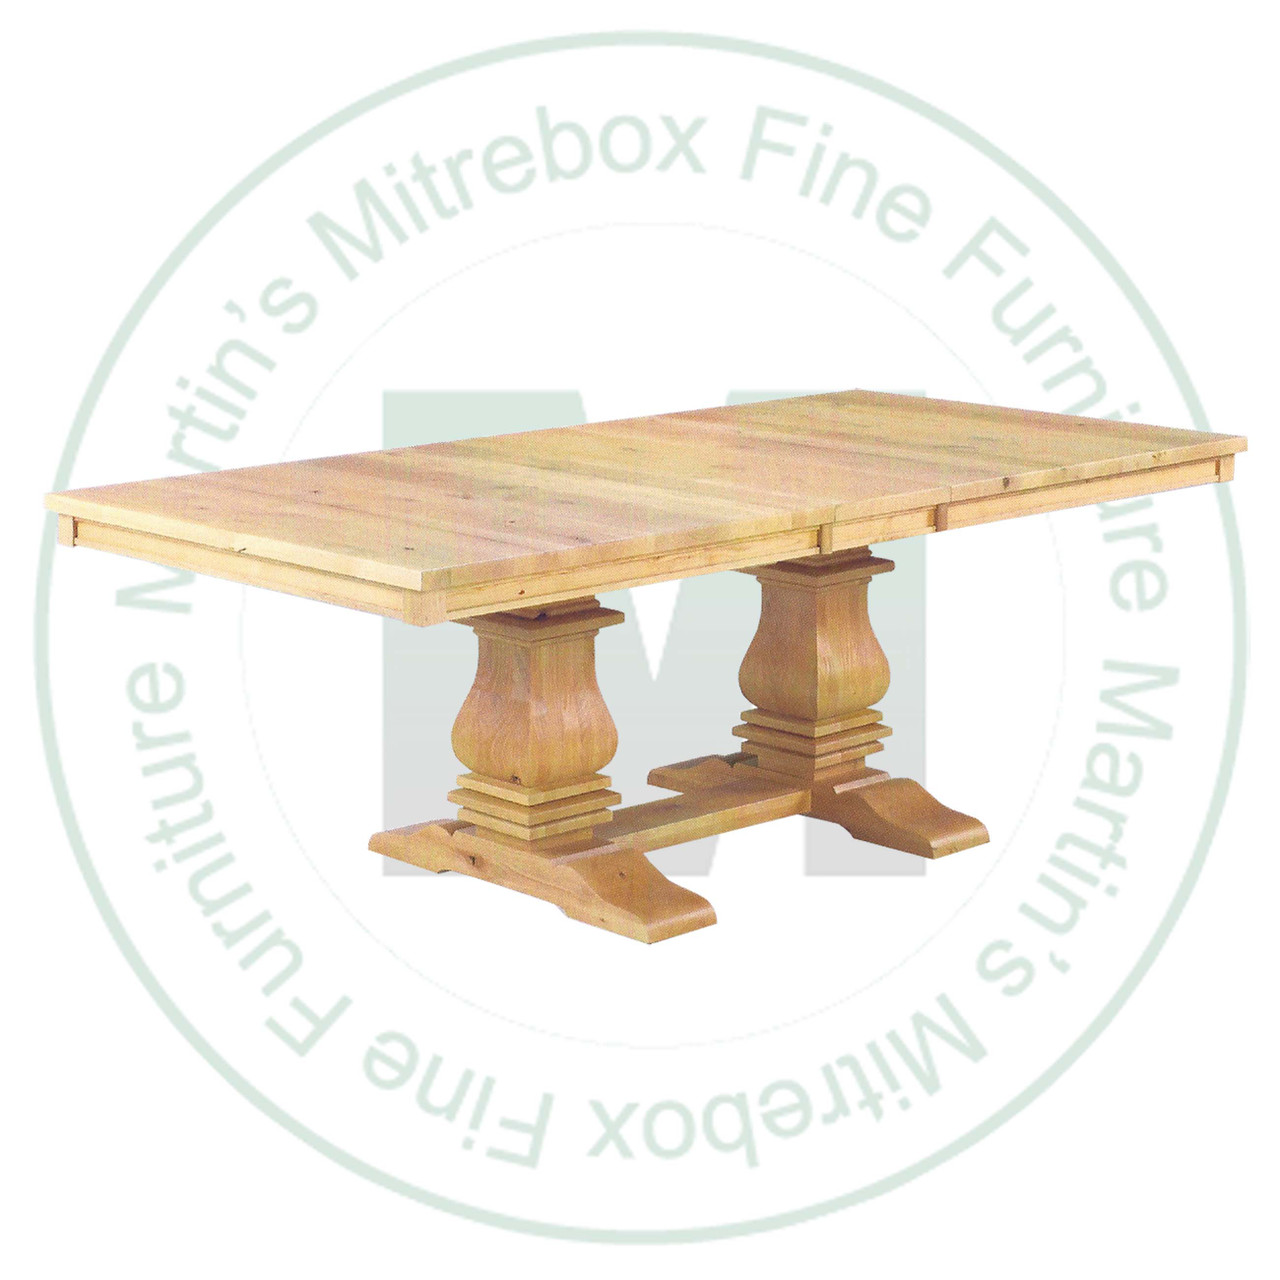 Wormy Maple Mediterranean Double Pedestal Table 48''D x 72''W x 30''H With 3 - 12'' Leaves. Table Has 1.25'' Thick Top